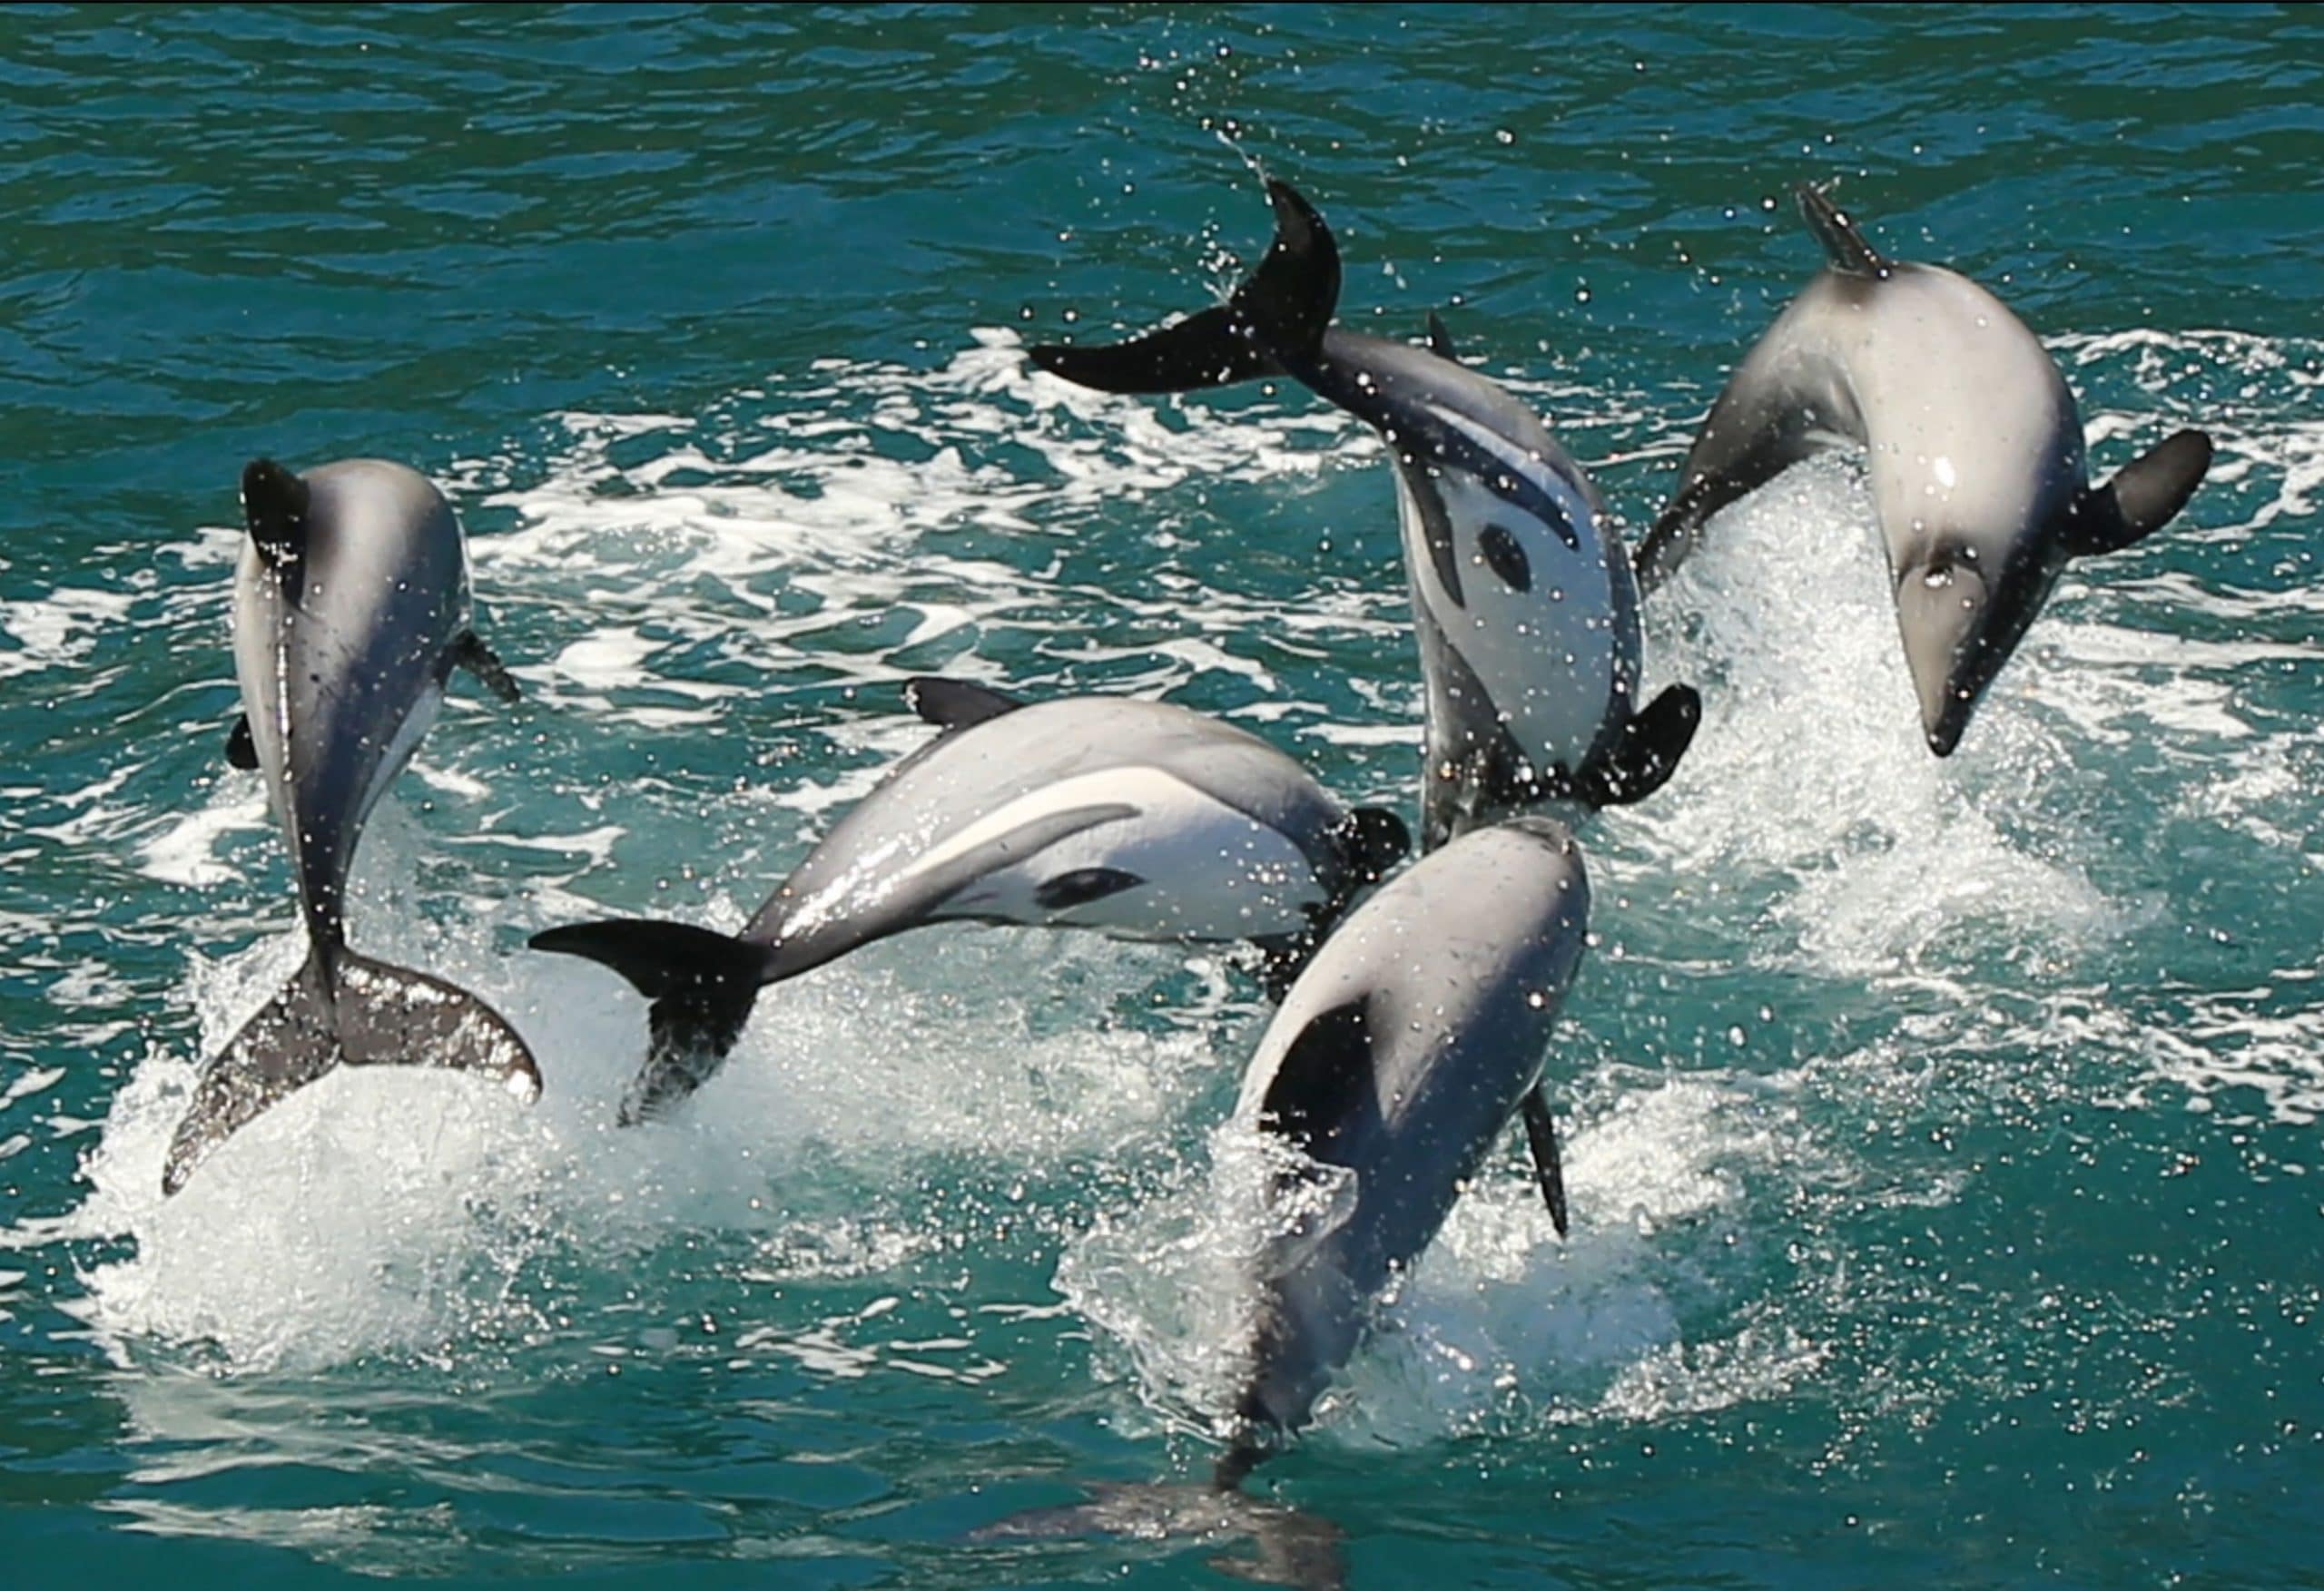 A group of New Zealand dolphins leaping